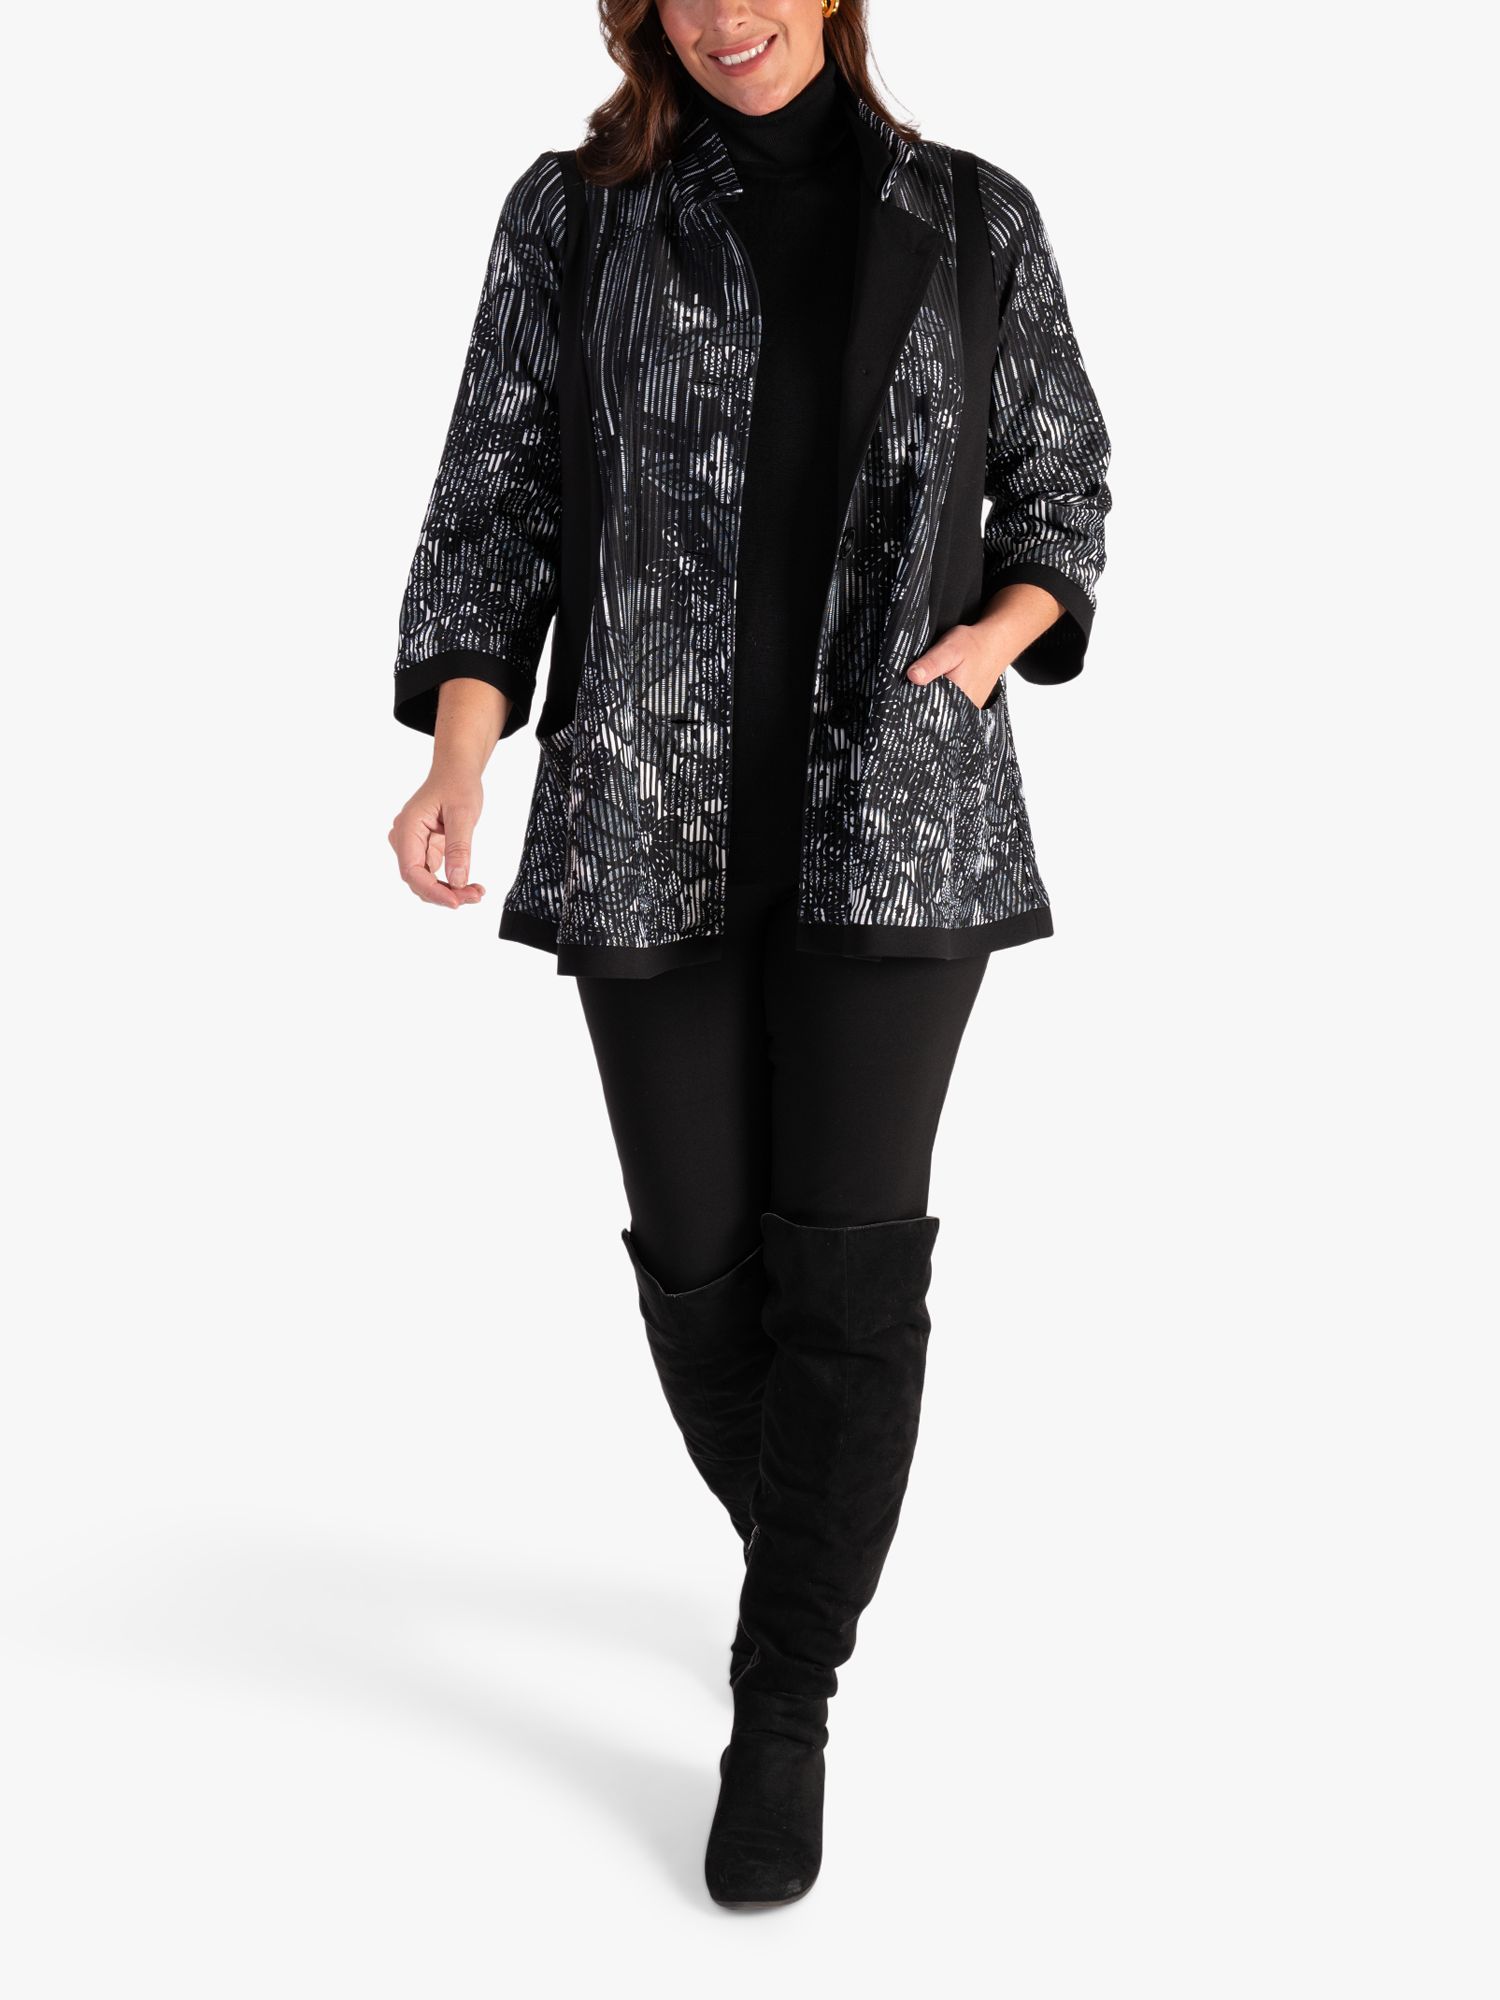 Buy chesca Abstract Floral Print Contrast Panels Jacket, Black/White Online at johnlewis.com